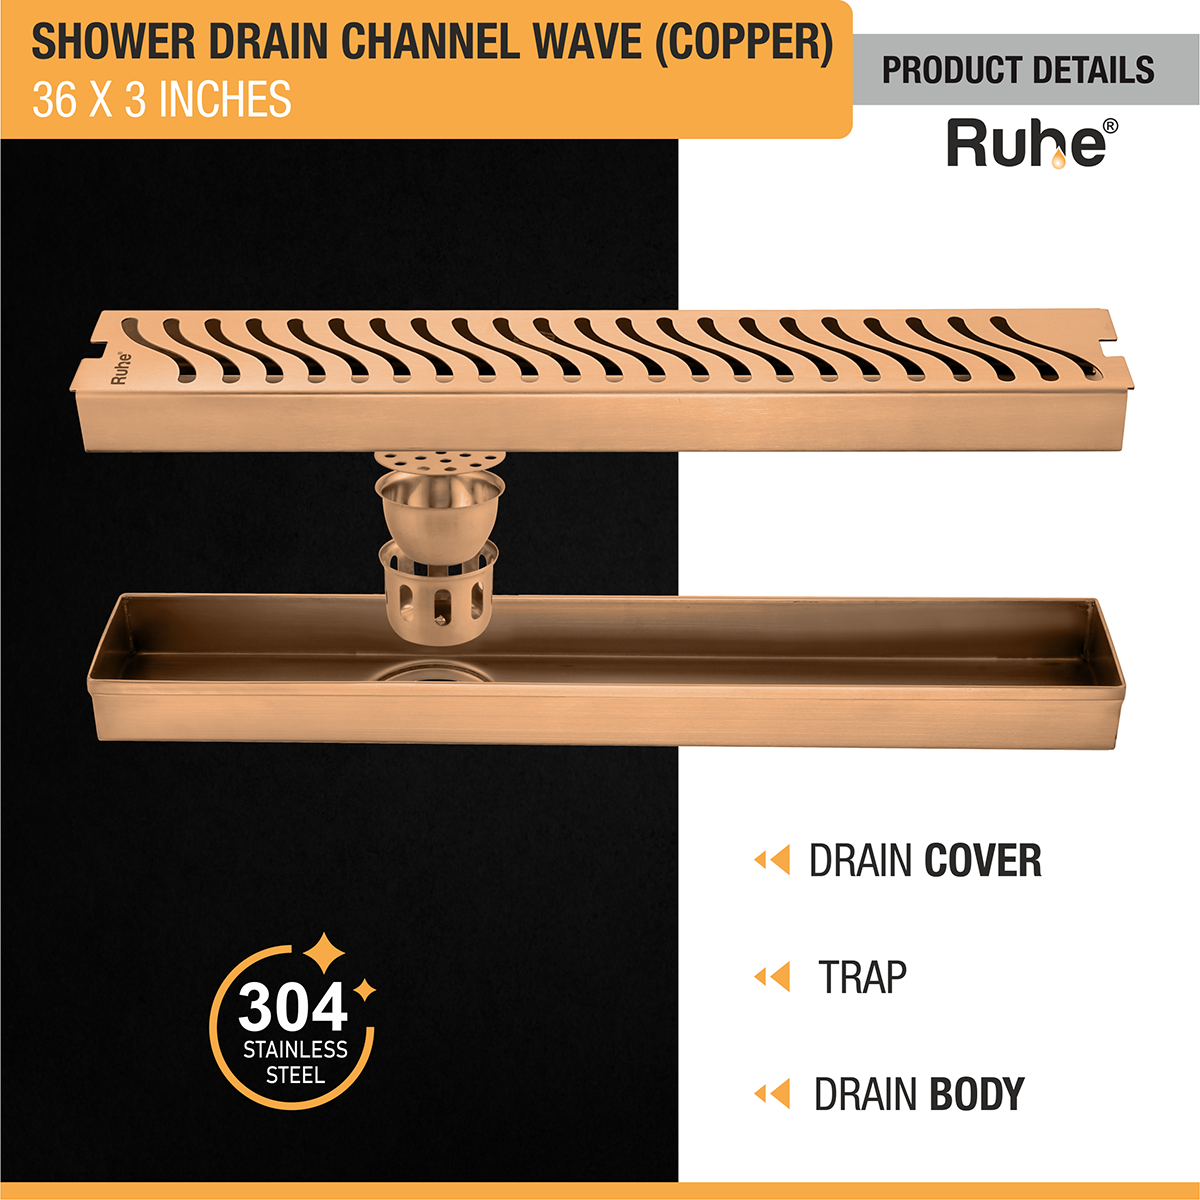 Wave Shower Drain Channel (36 x 3 Inches) ROSE GOLD/ANTIQUE COPPER product details